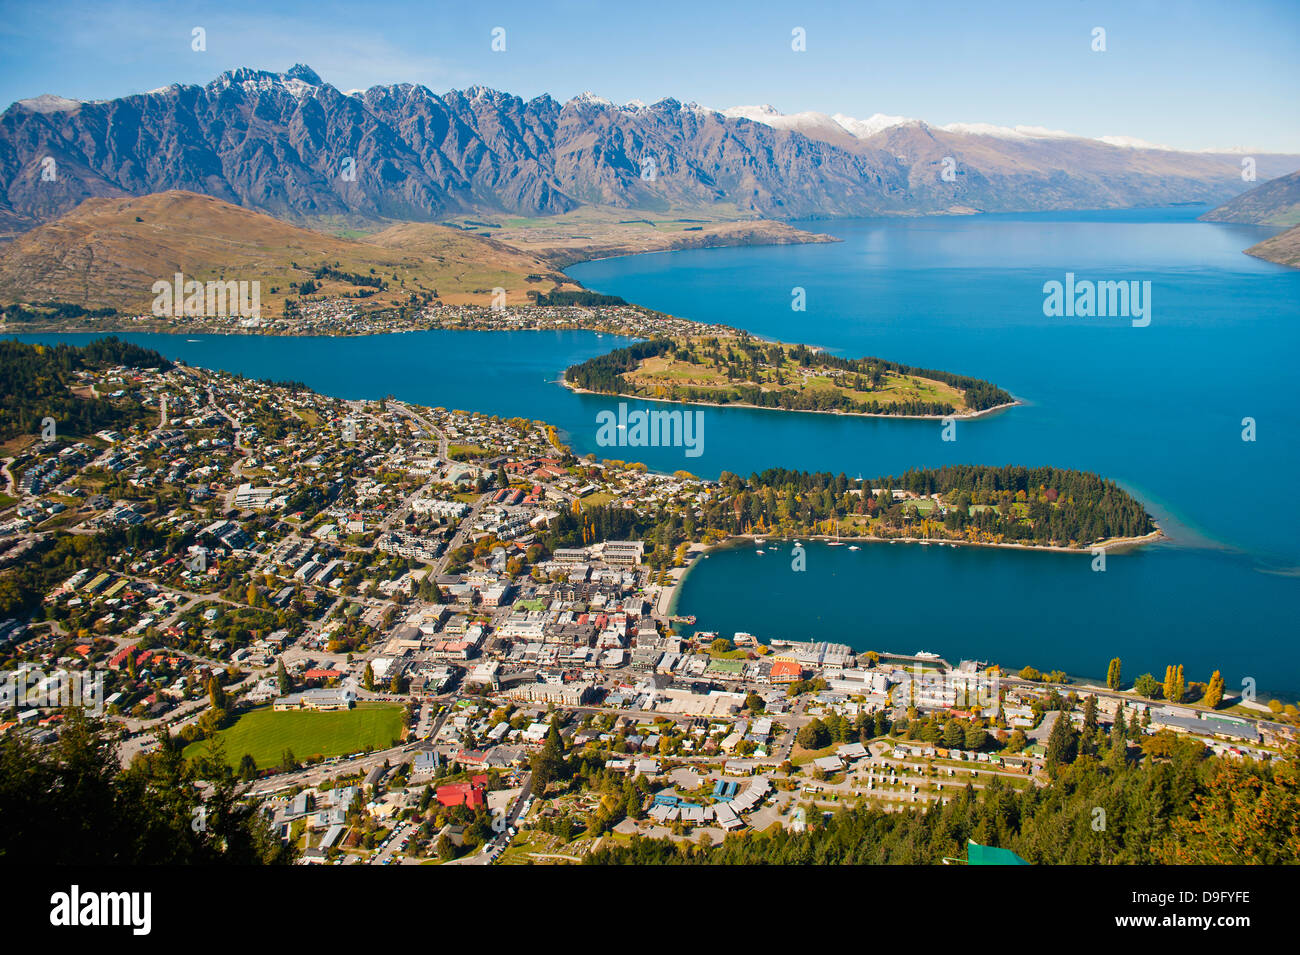 Aerial view of Queenstown, Lake Wakatipu and the Remarkables Mountain Range, Otago, South Island, New Zealand Stock Photo